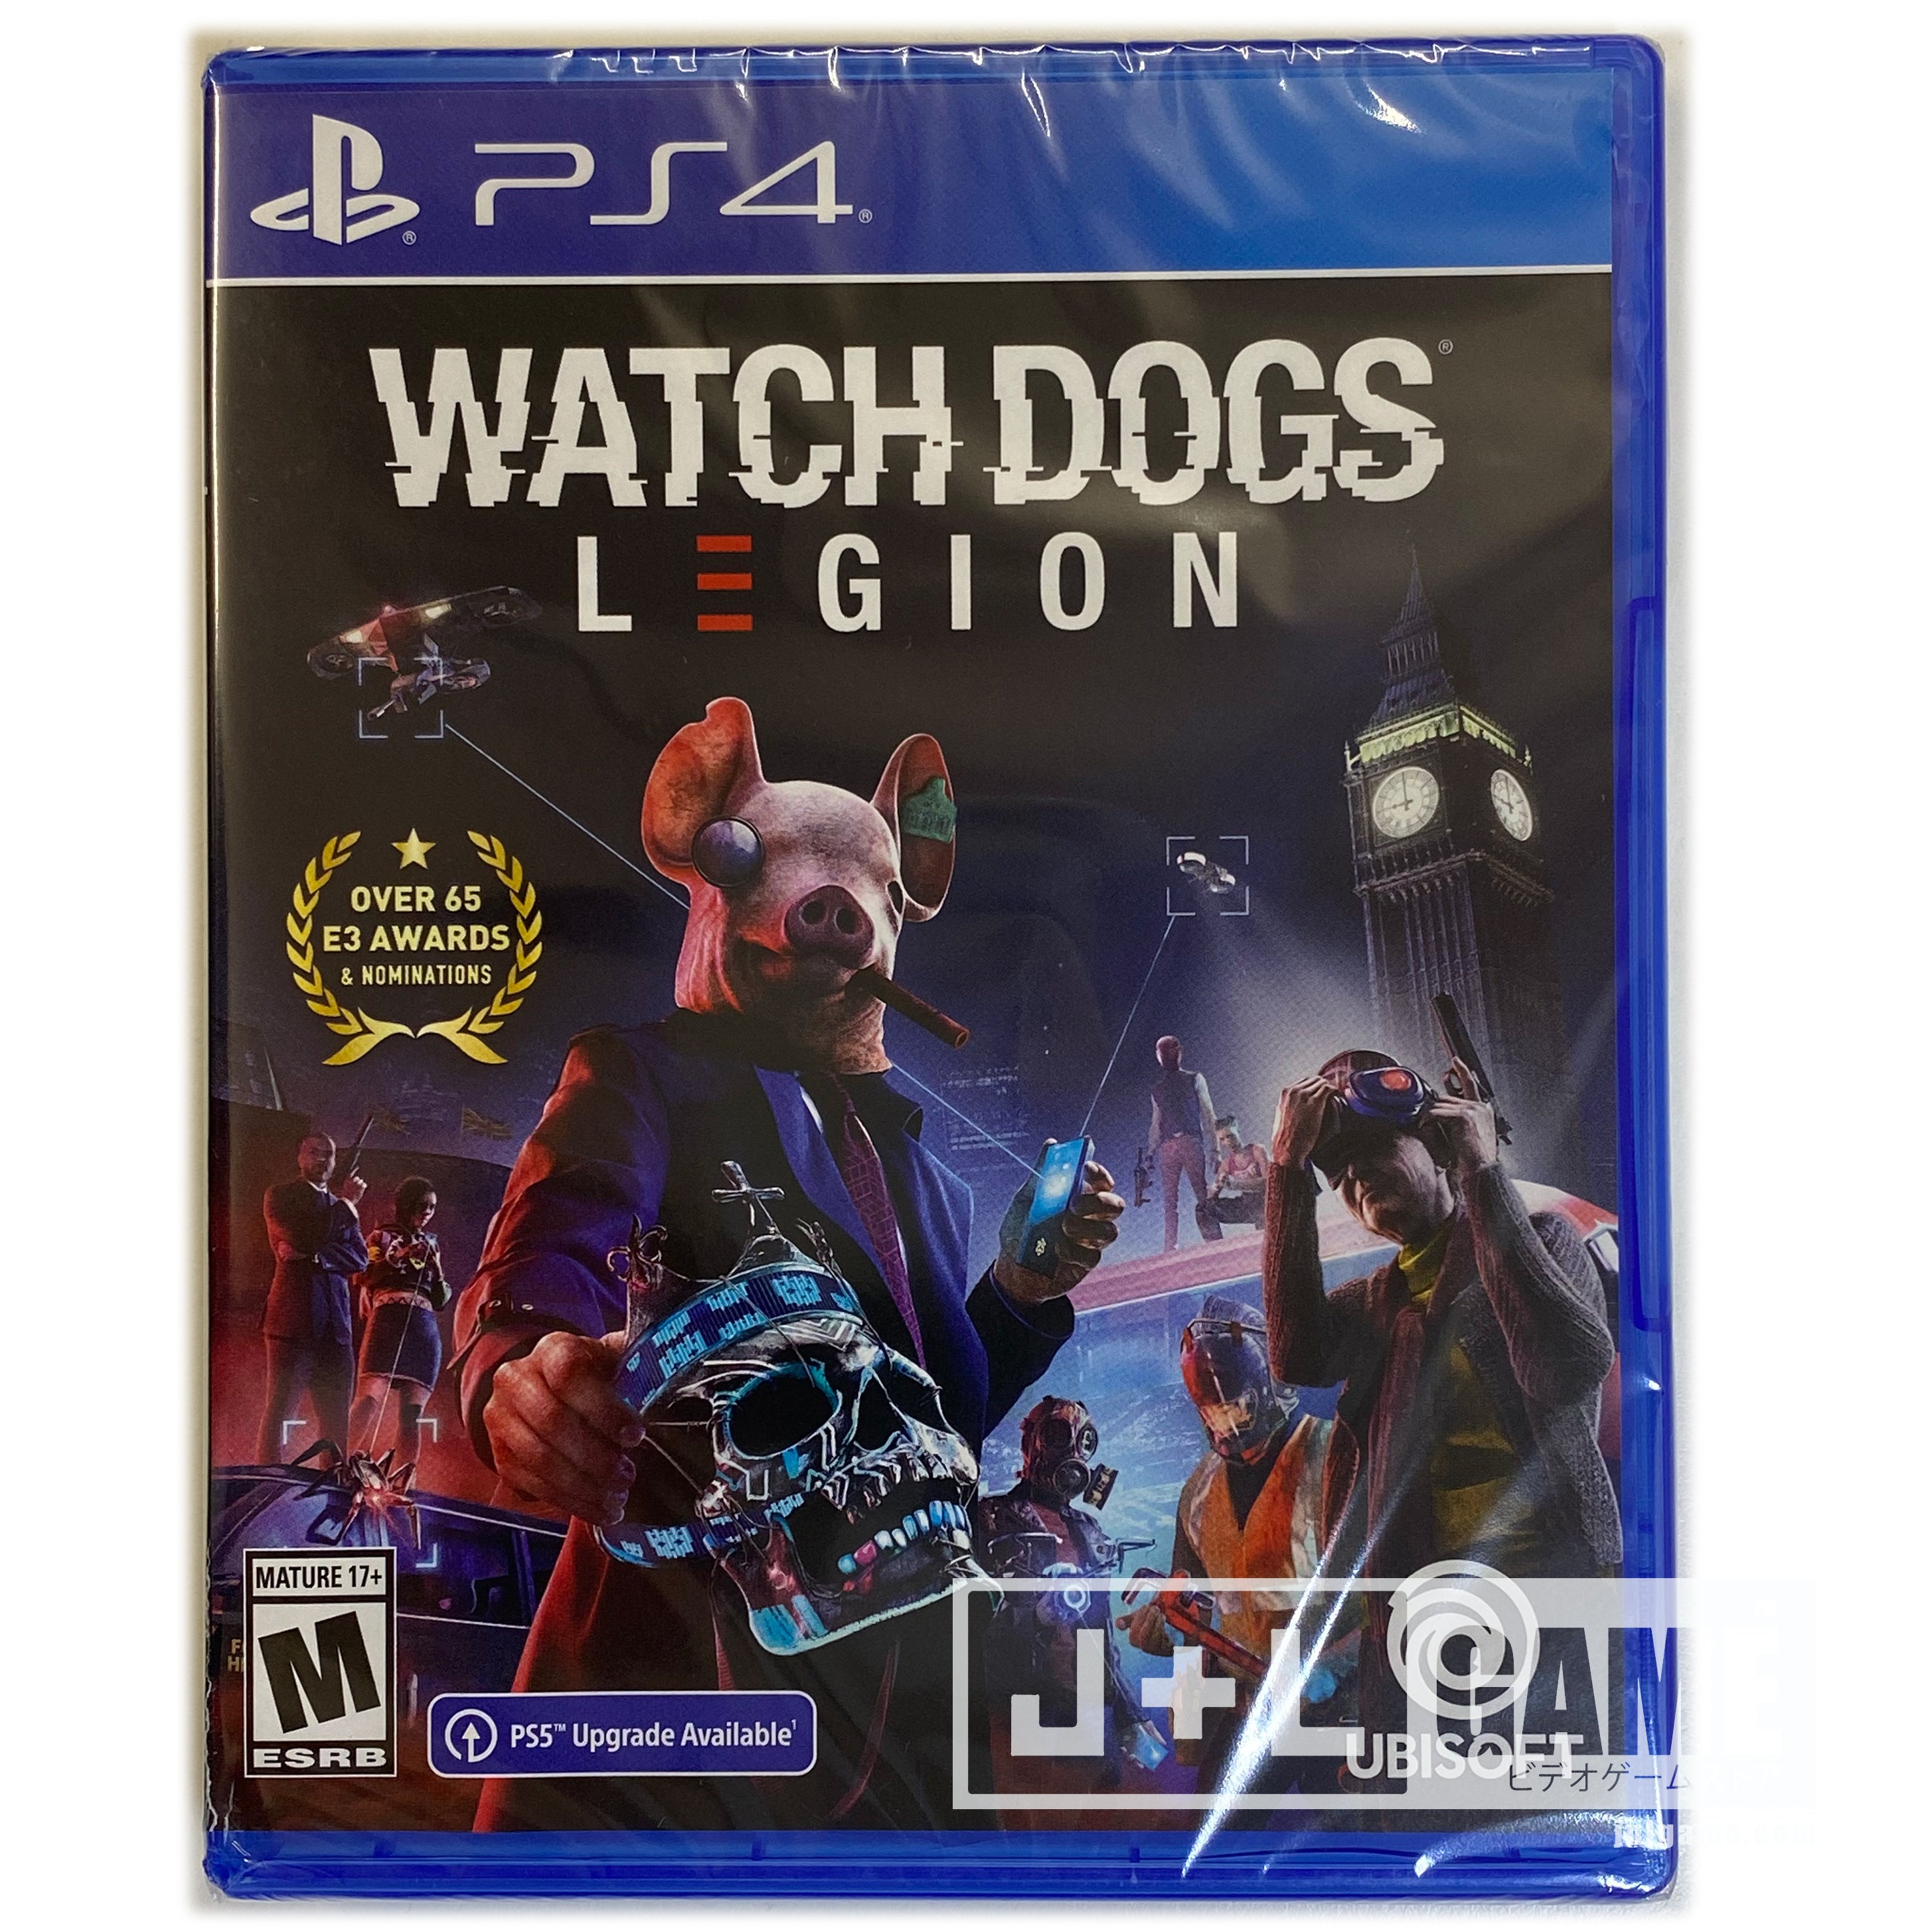 Watch Dogs Legion - (PS4) PlayStation 4 [UNBOXING] Video Games Ubisoft   